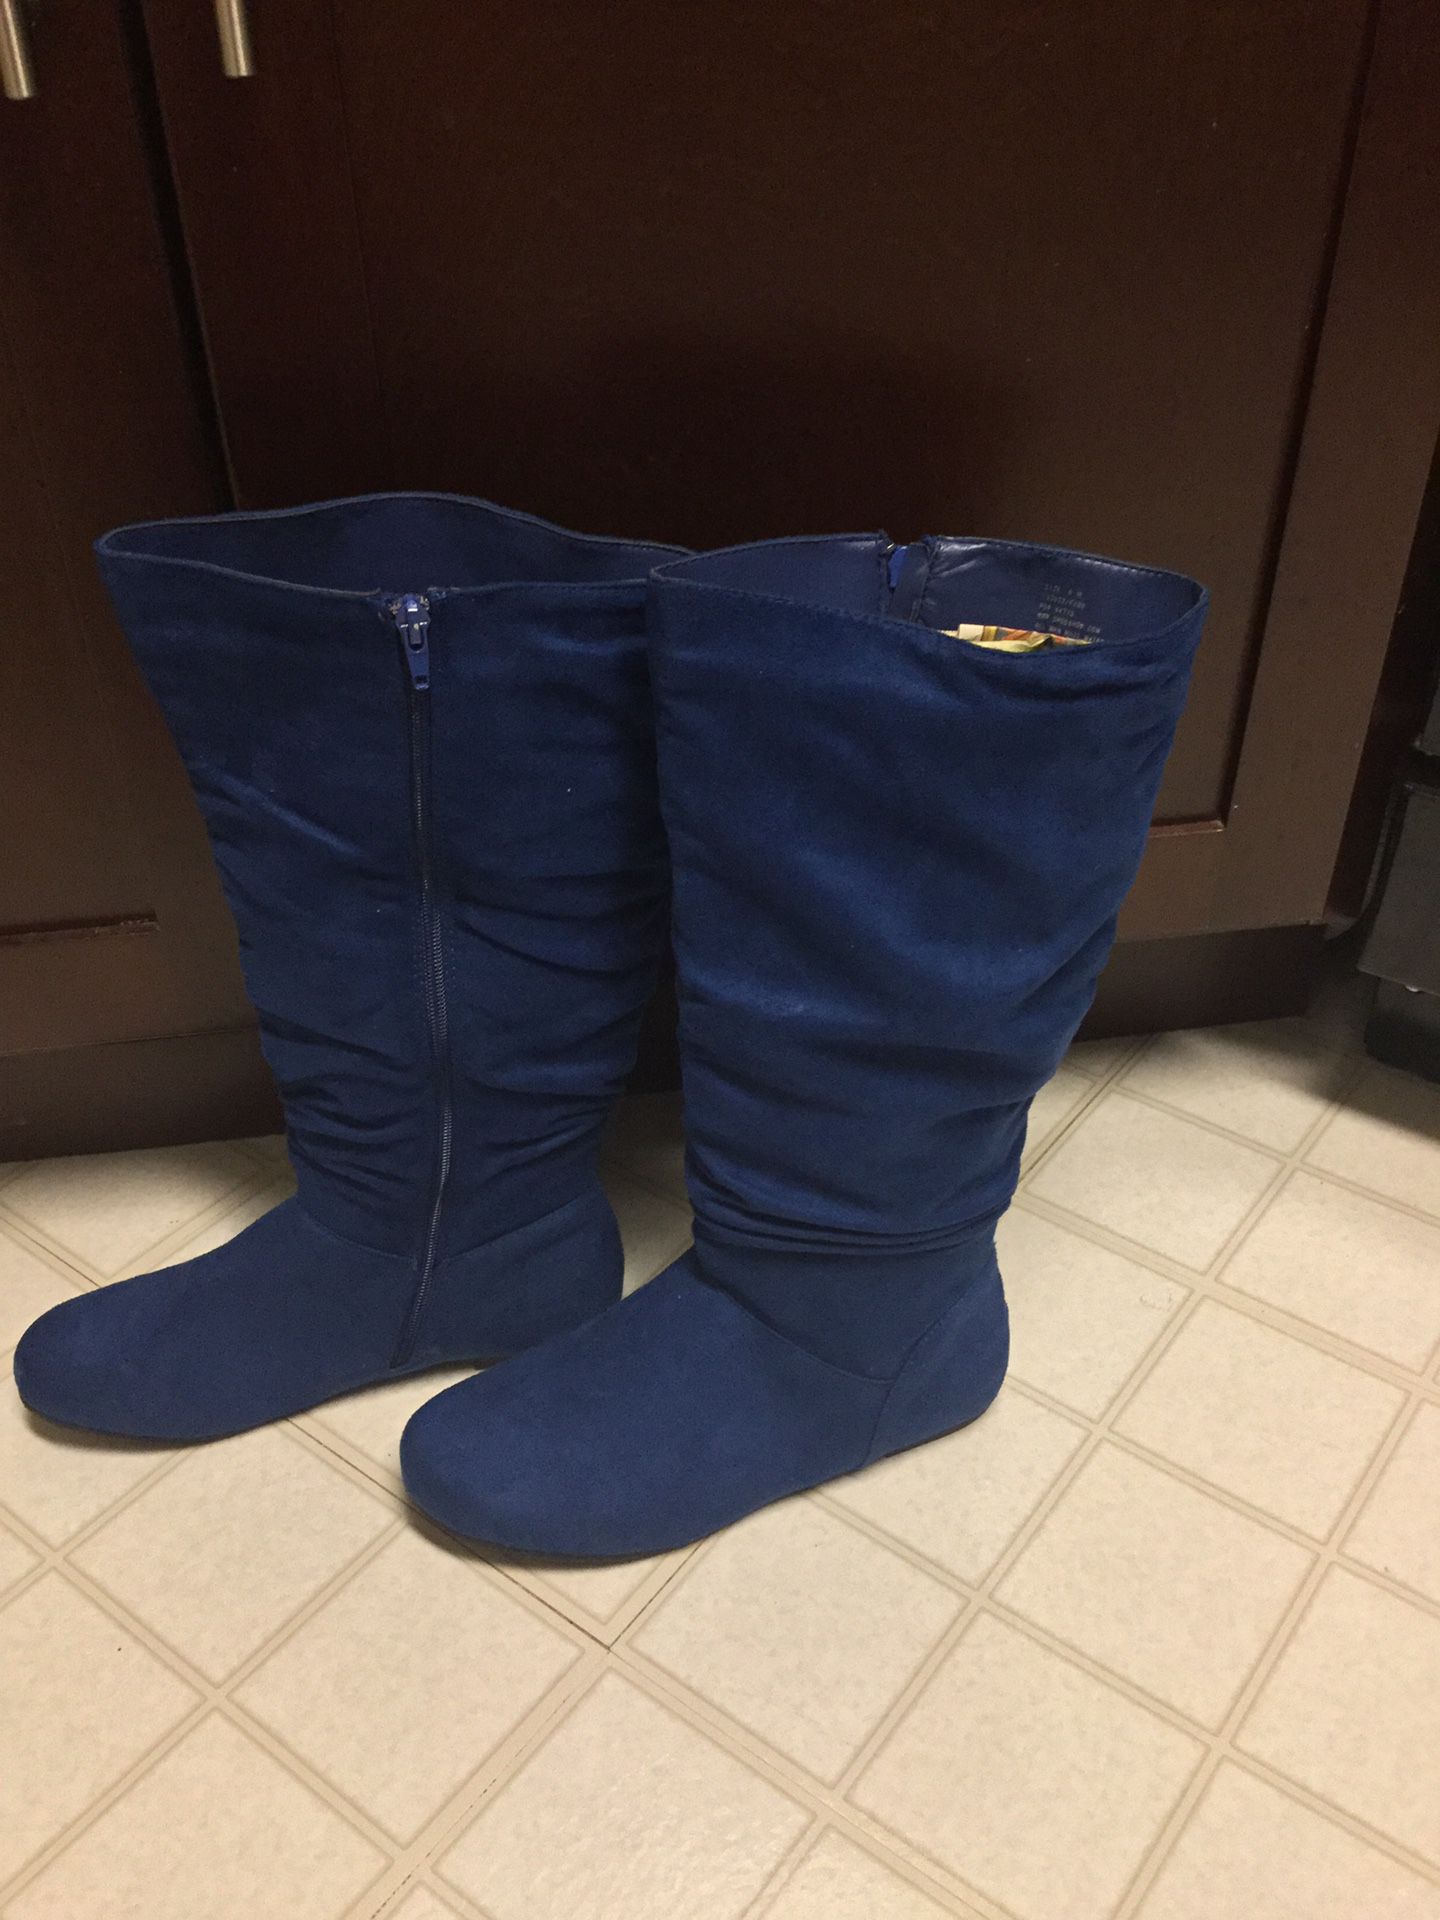 Size 8 women’s blue suede mid calf boots. BRAND NEW!!